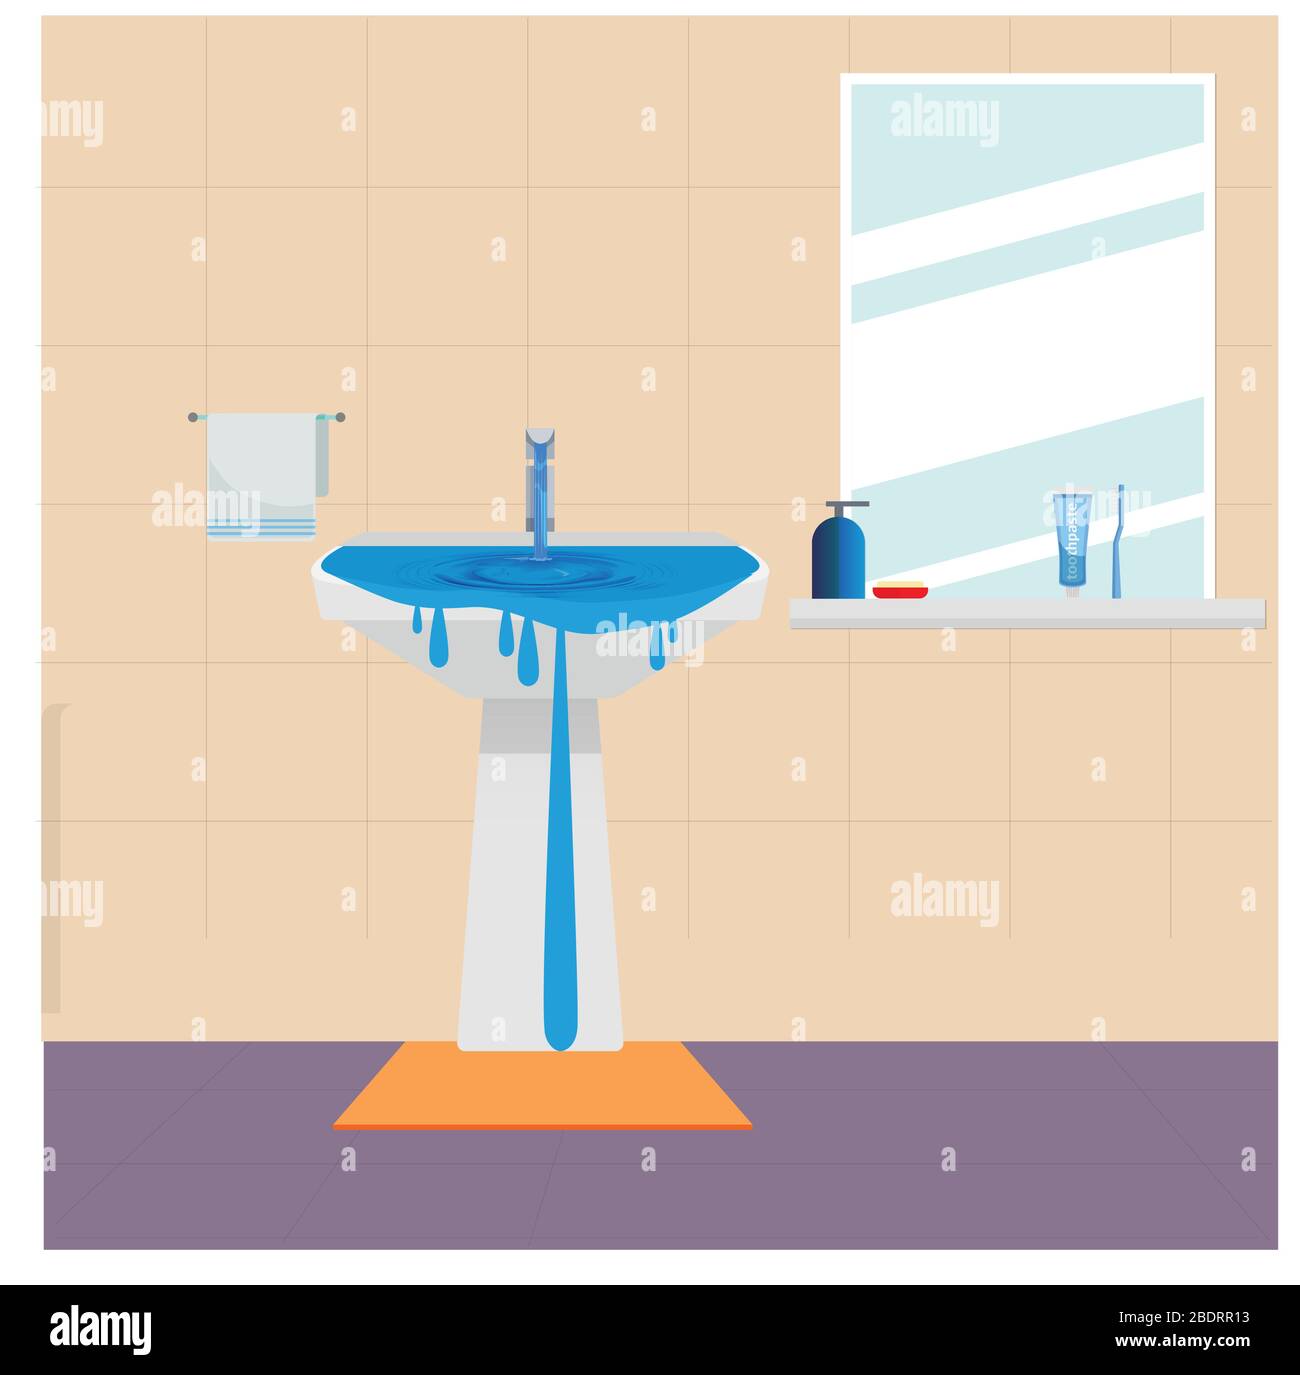 Wastage of water theme. Wastage of water from running tap as sink is overflow with the water. Wastage of water drop from overflowing sink and spreadin Stock Vector